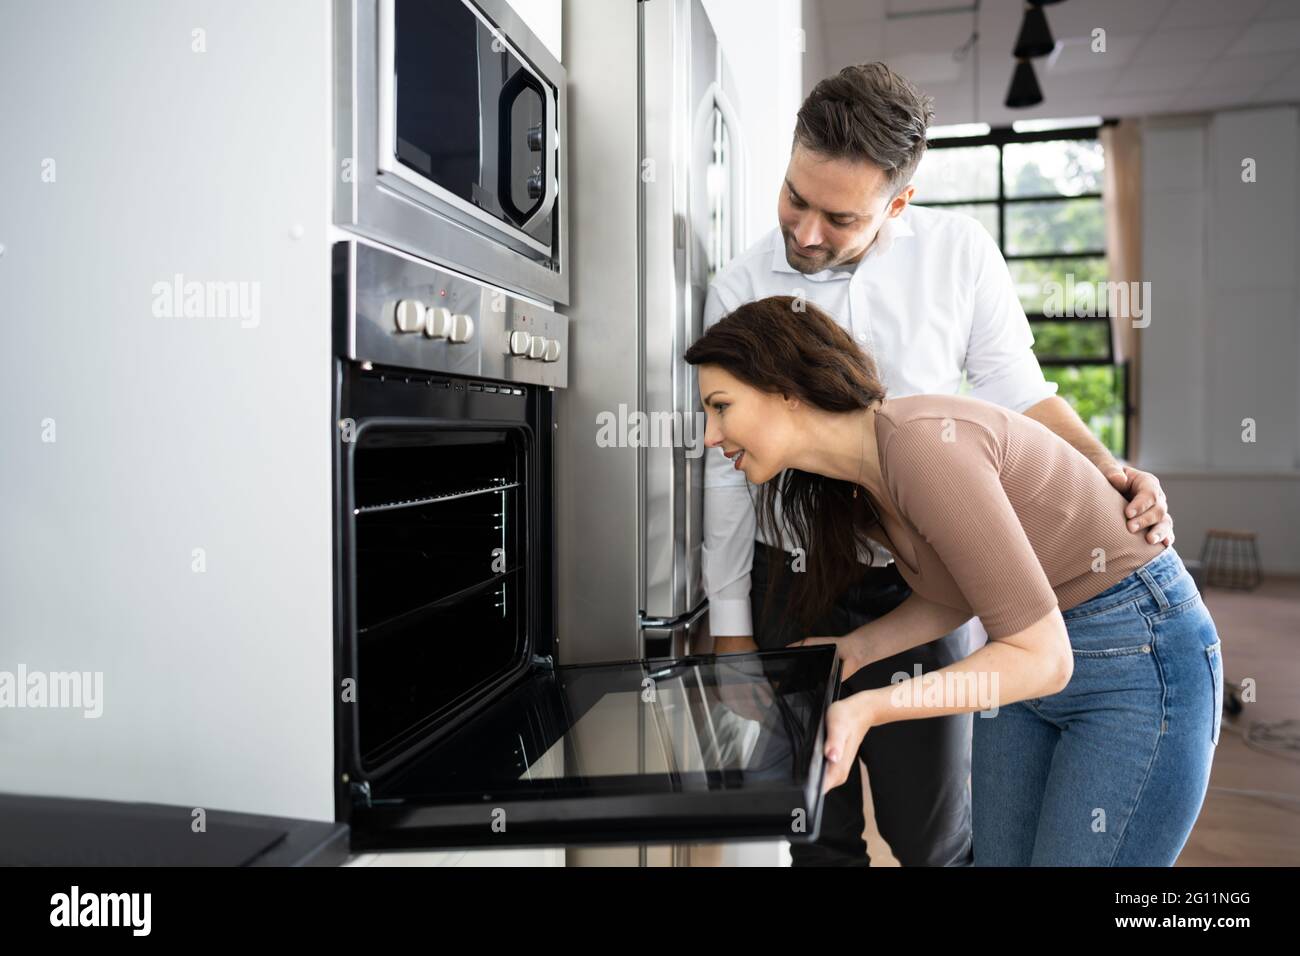 Couple Buying Electrical Oven With Consumer Loan Credit Stock Photo